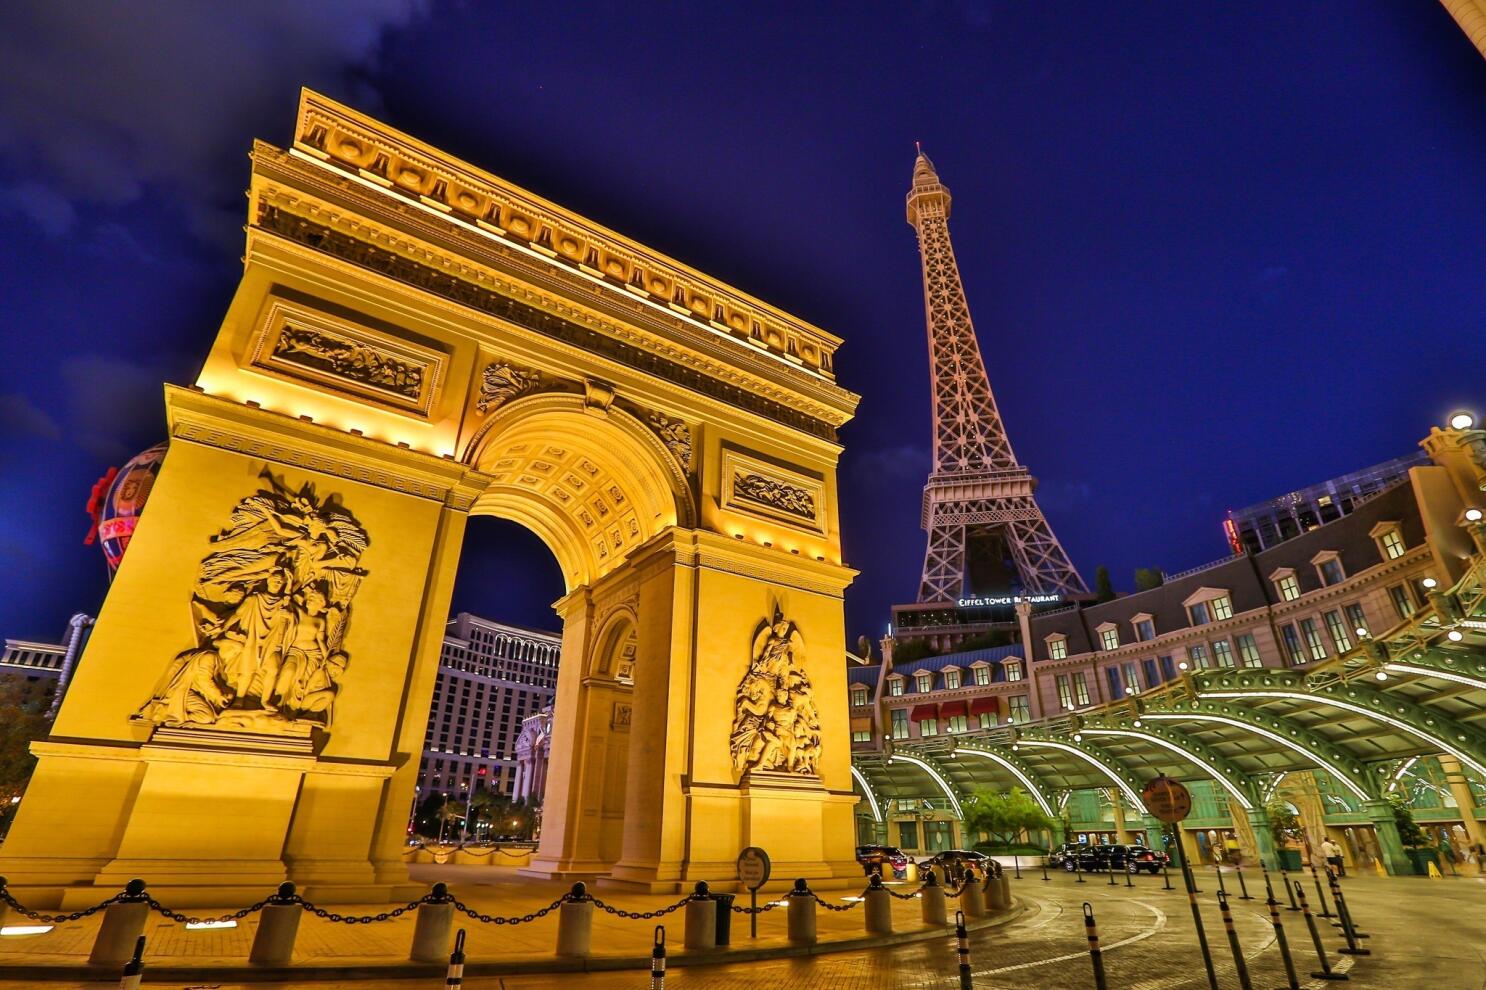 Eiffel Tower Experience is one of the very best things to do in Las Vegas